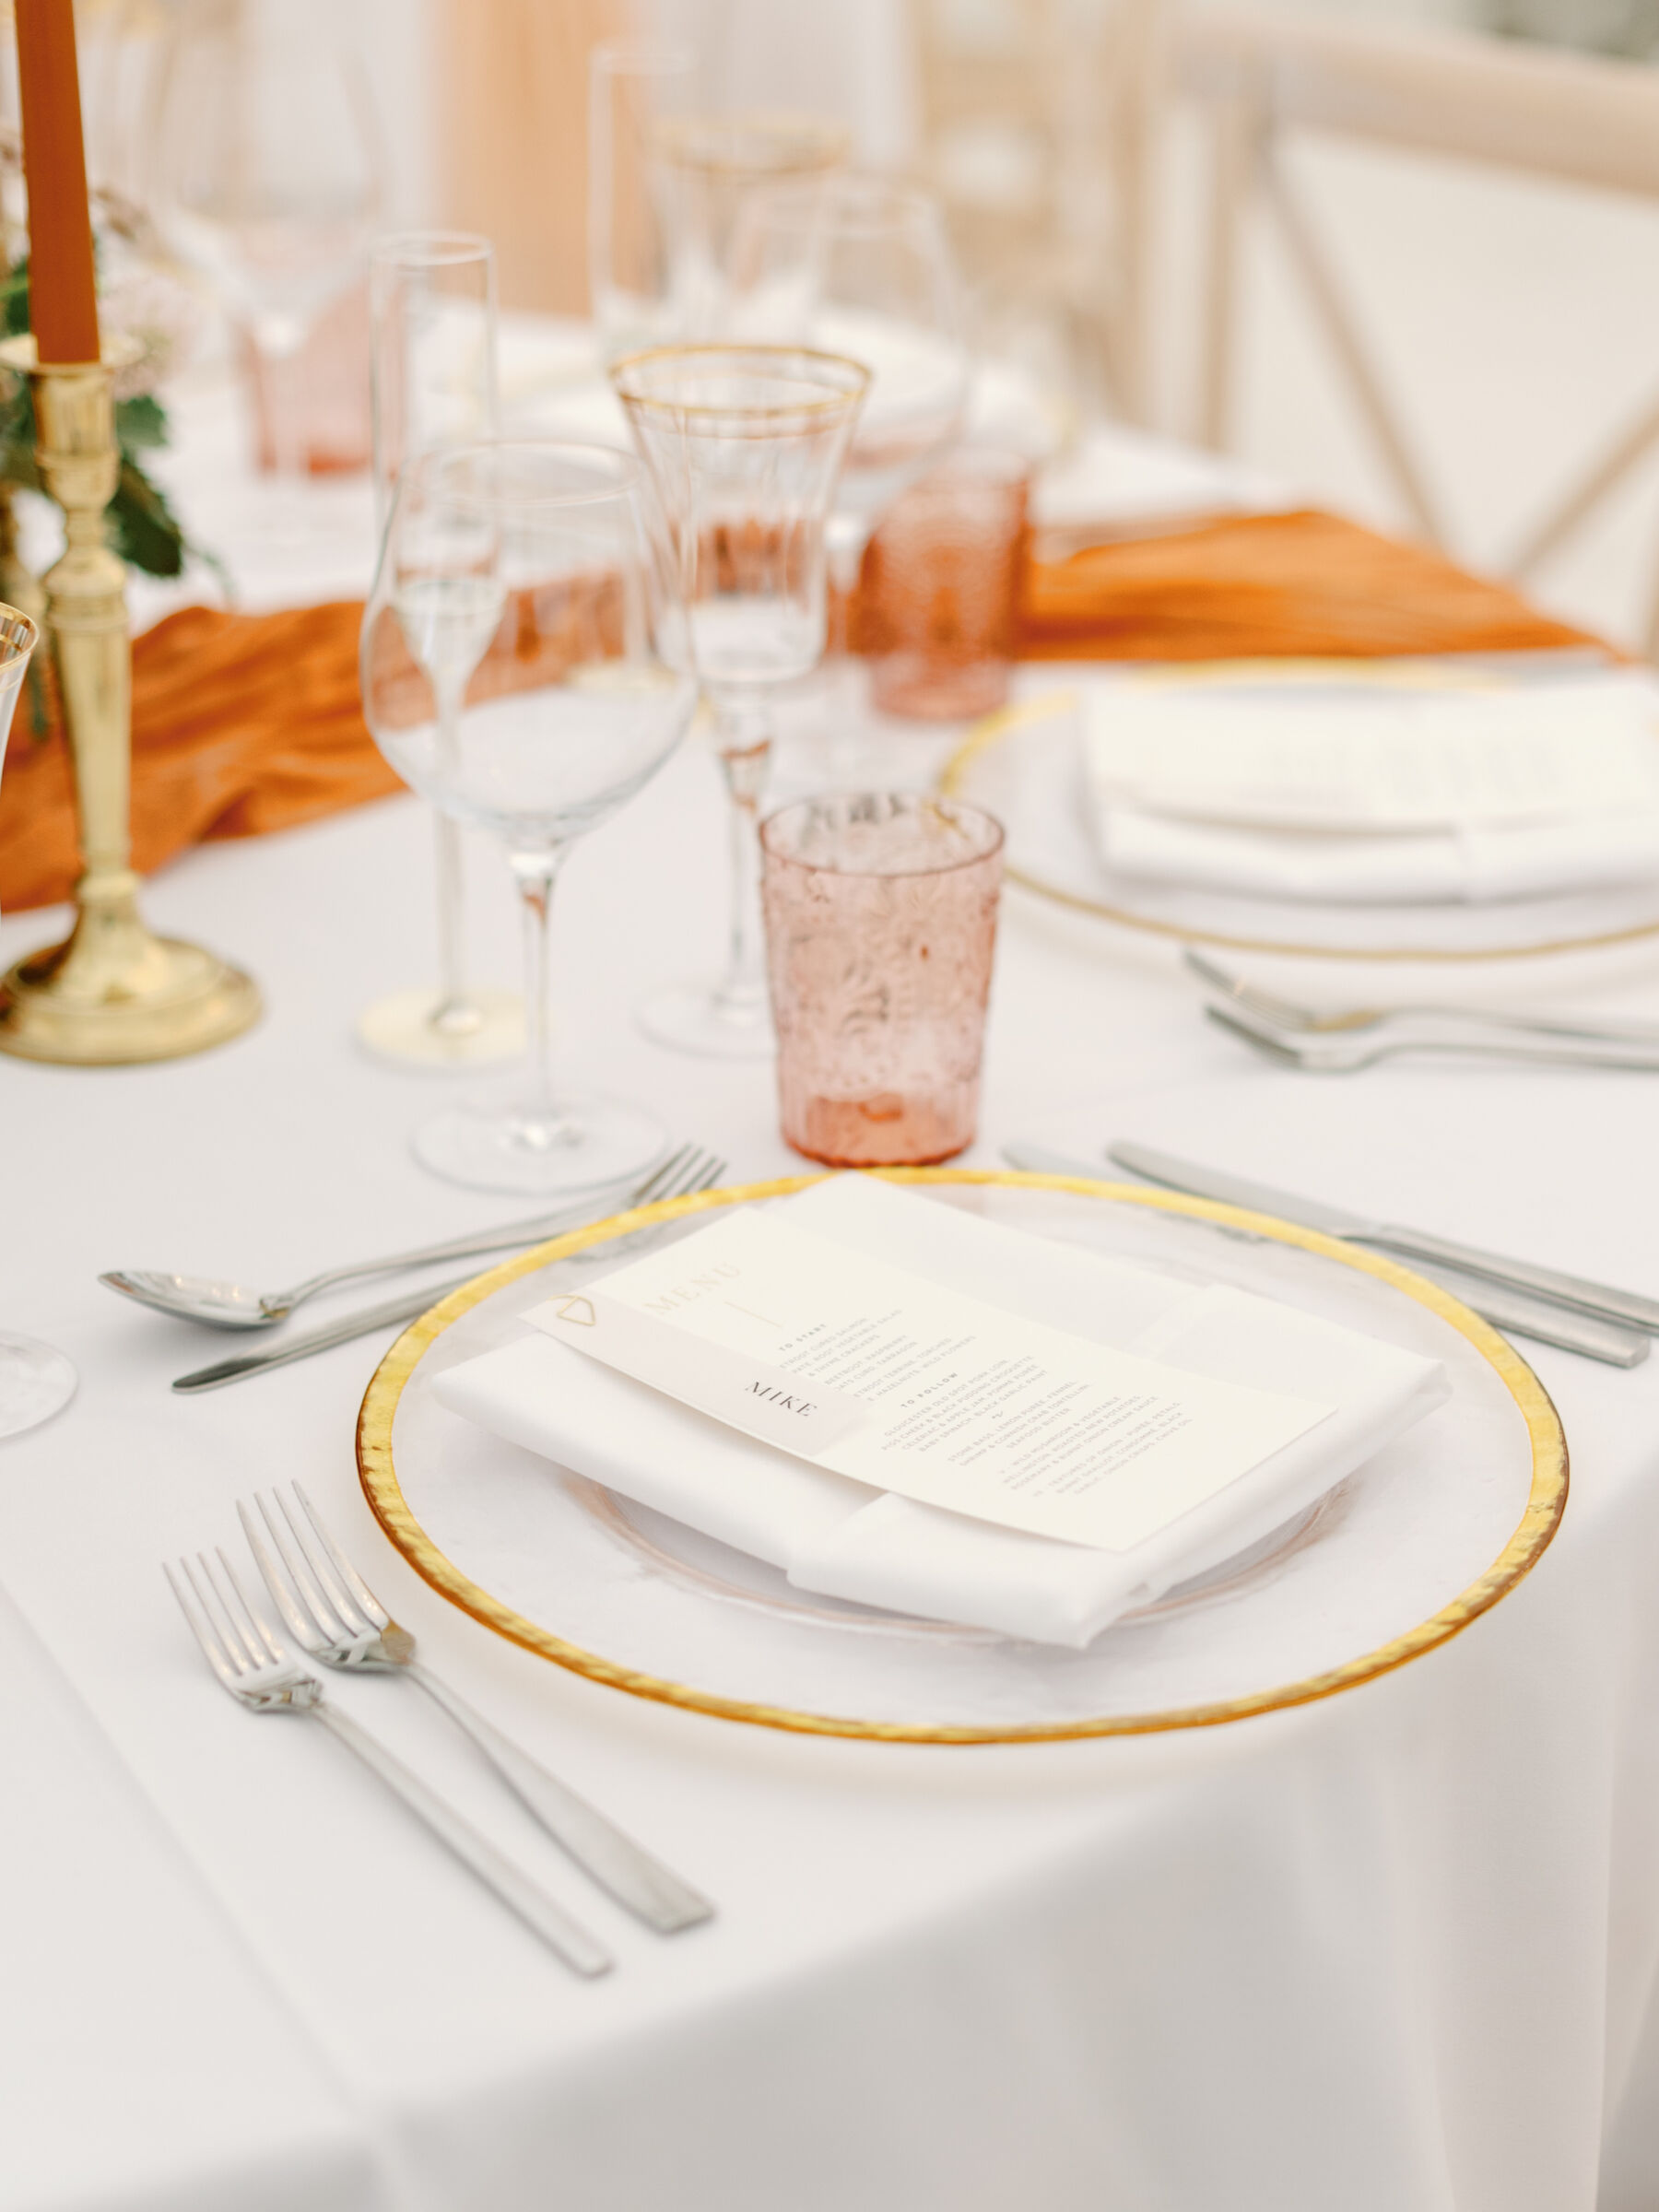 Gold rimmed charger plate at a wedding receptiion.